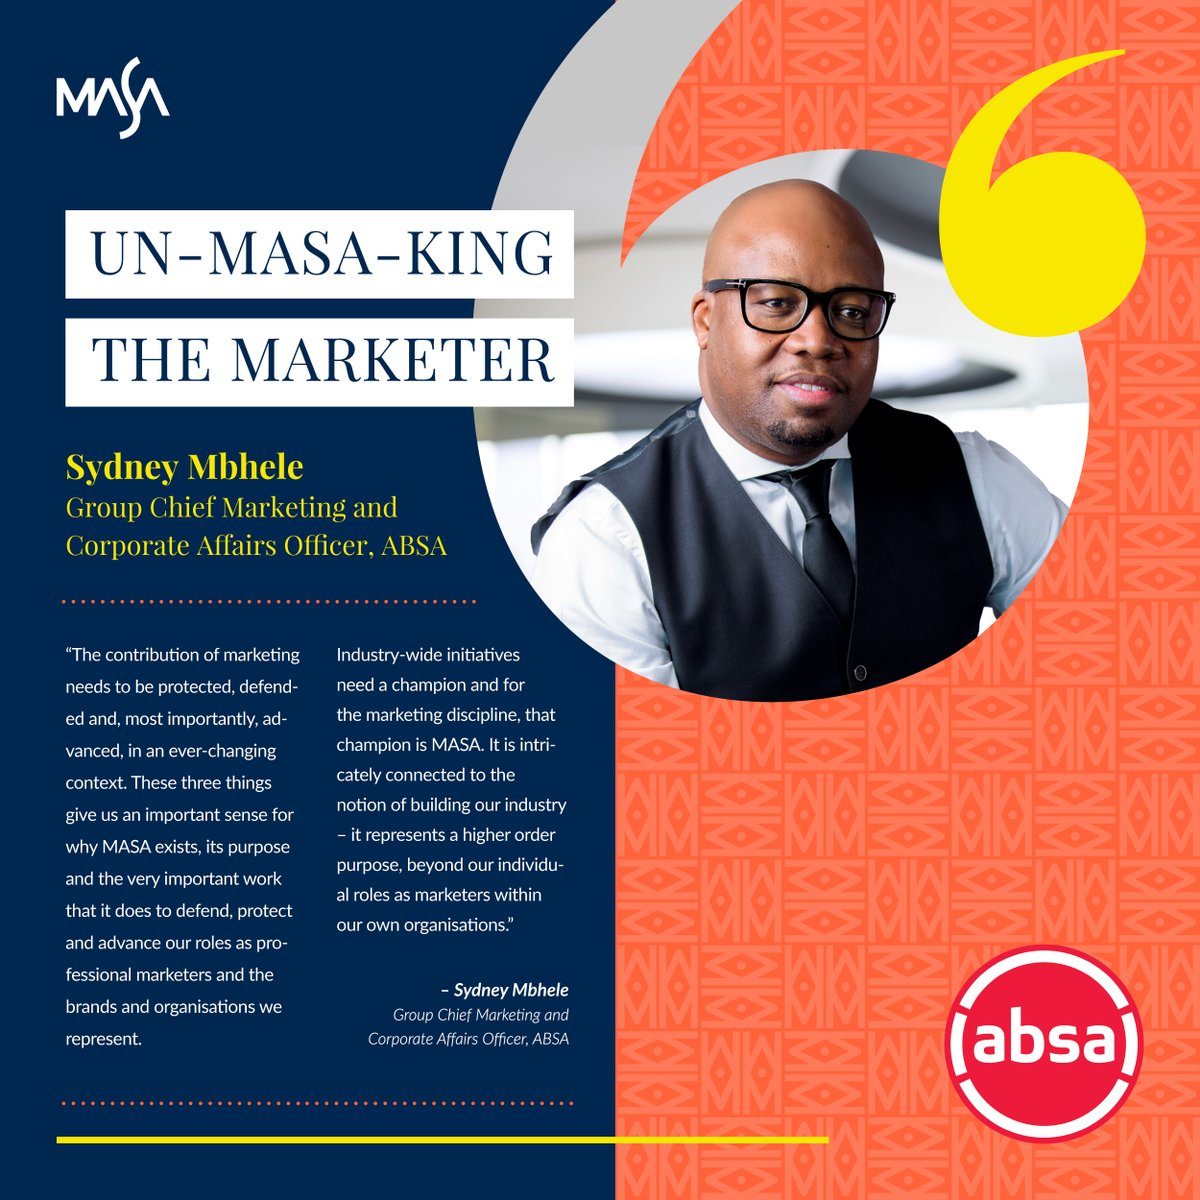 Sydney Mbhele, Group Chief Marketing and Corporate Affairs Officer at @Absa, believes corporate members of #MASA together can defeat the Goliath’s of the industry. To be inspired by industry leaders and to advance our industry, #JoinMASA: marketingsa.co.za #SupportMASA